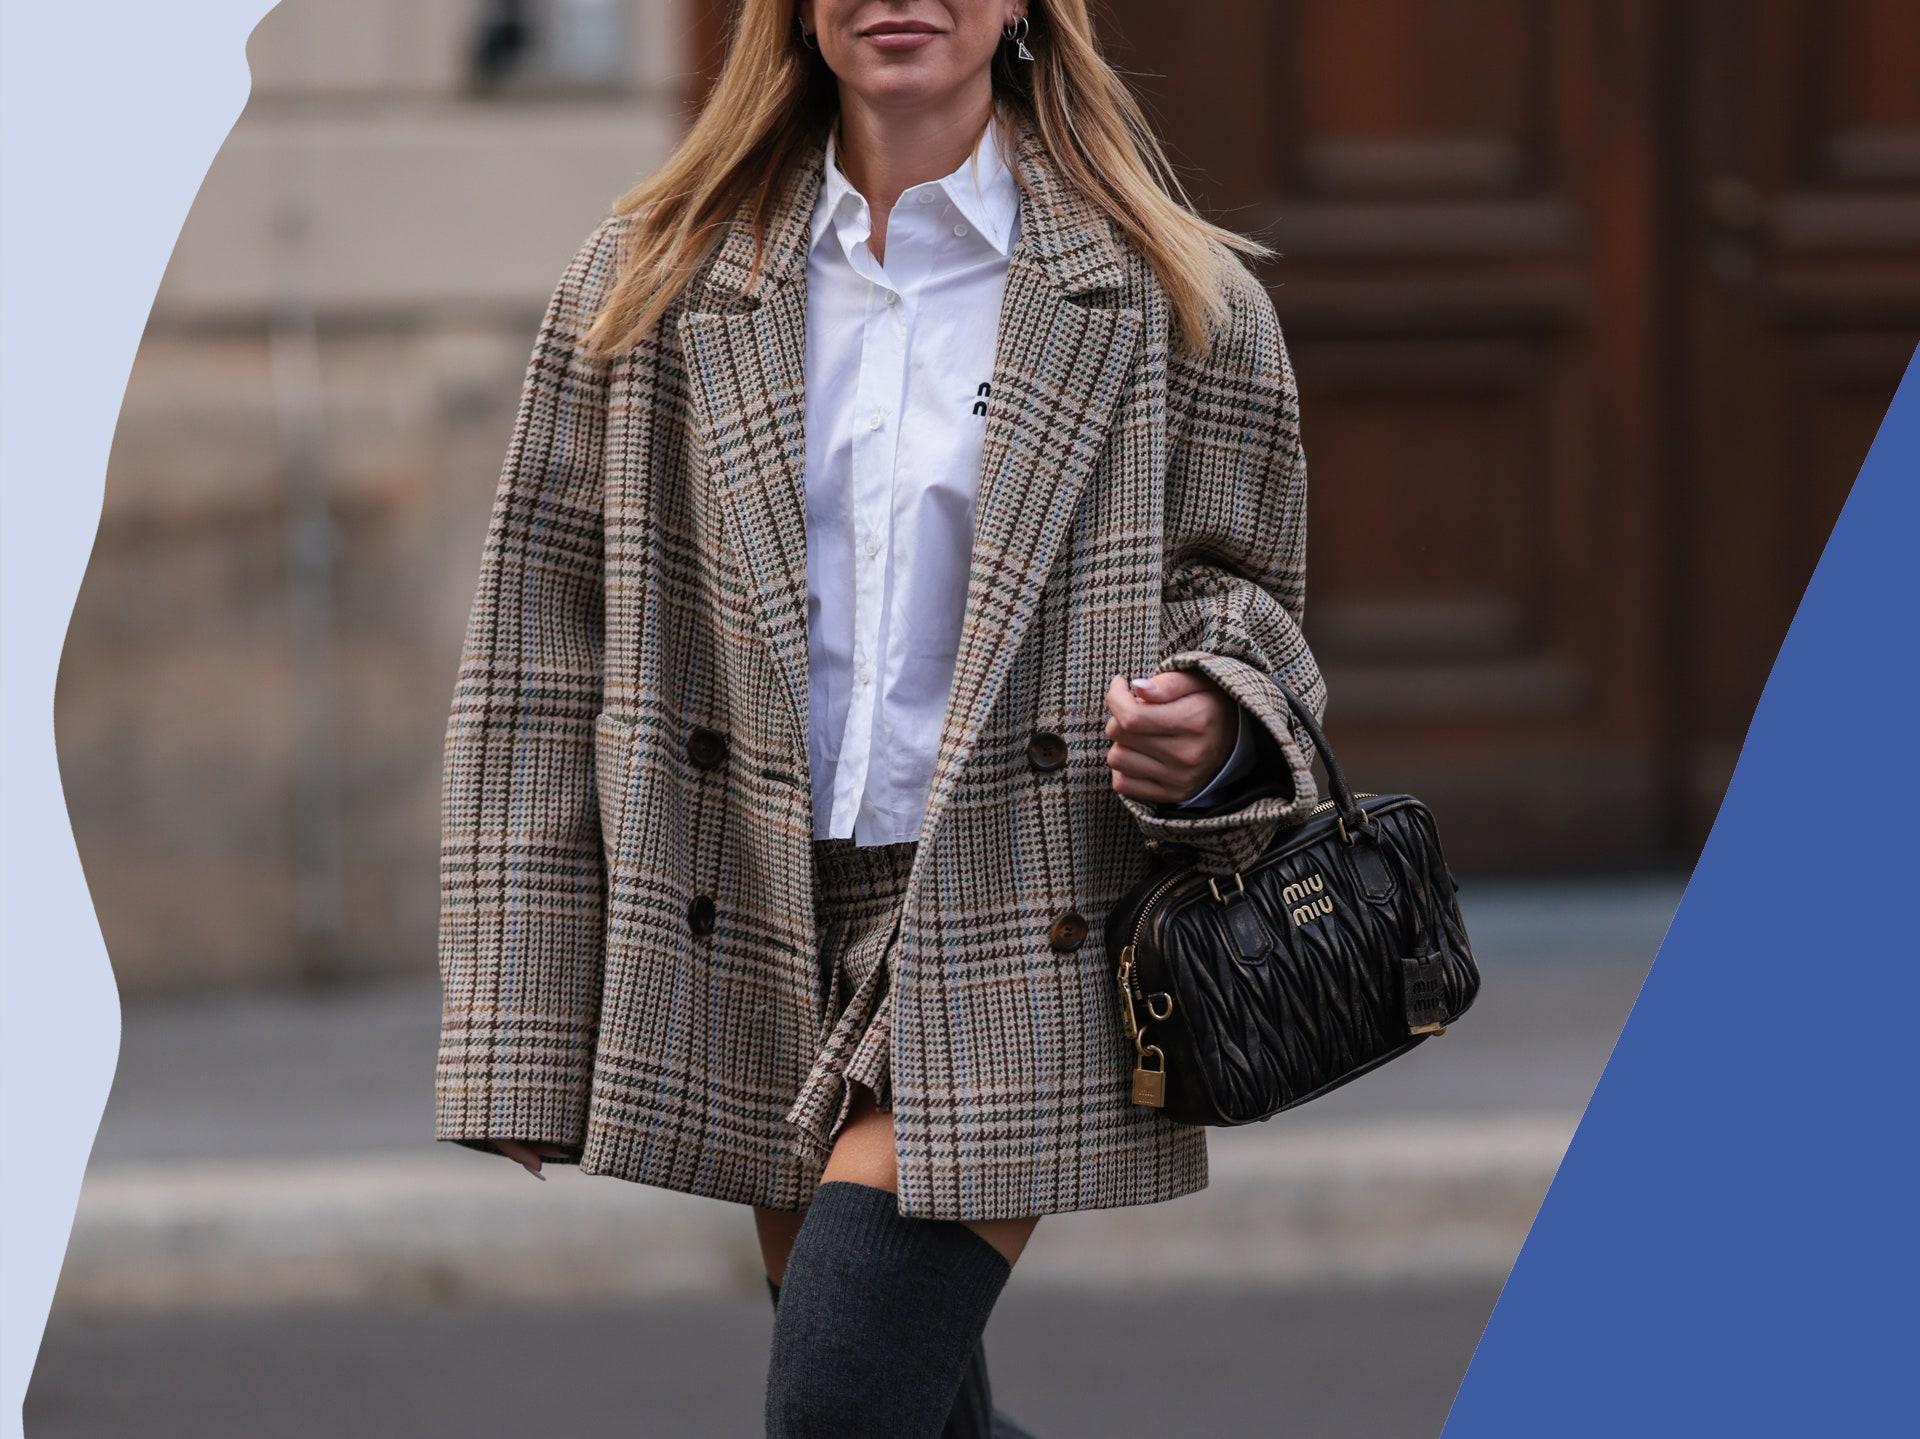 Preppycore Aesthetic Get The Look Glamour Uk